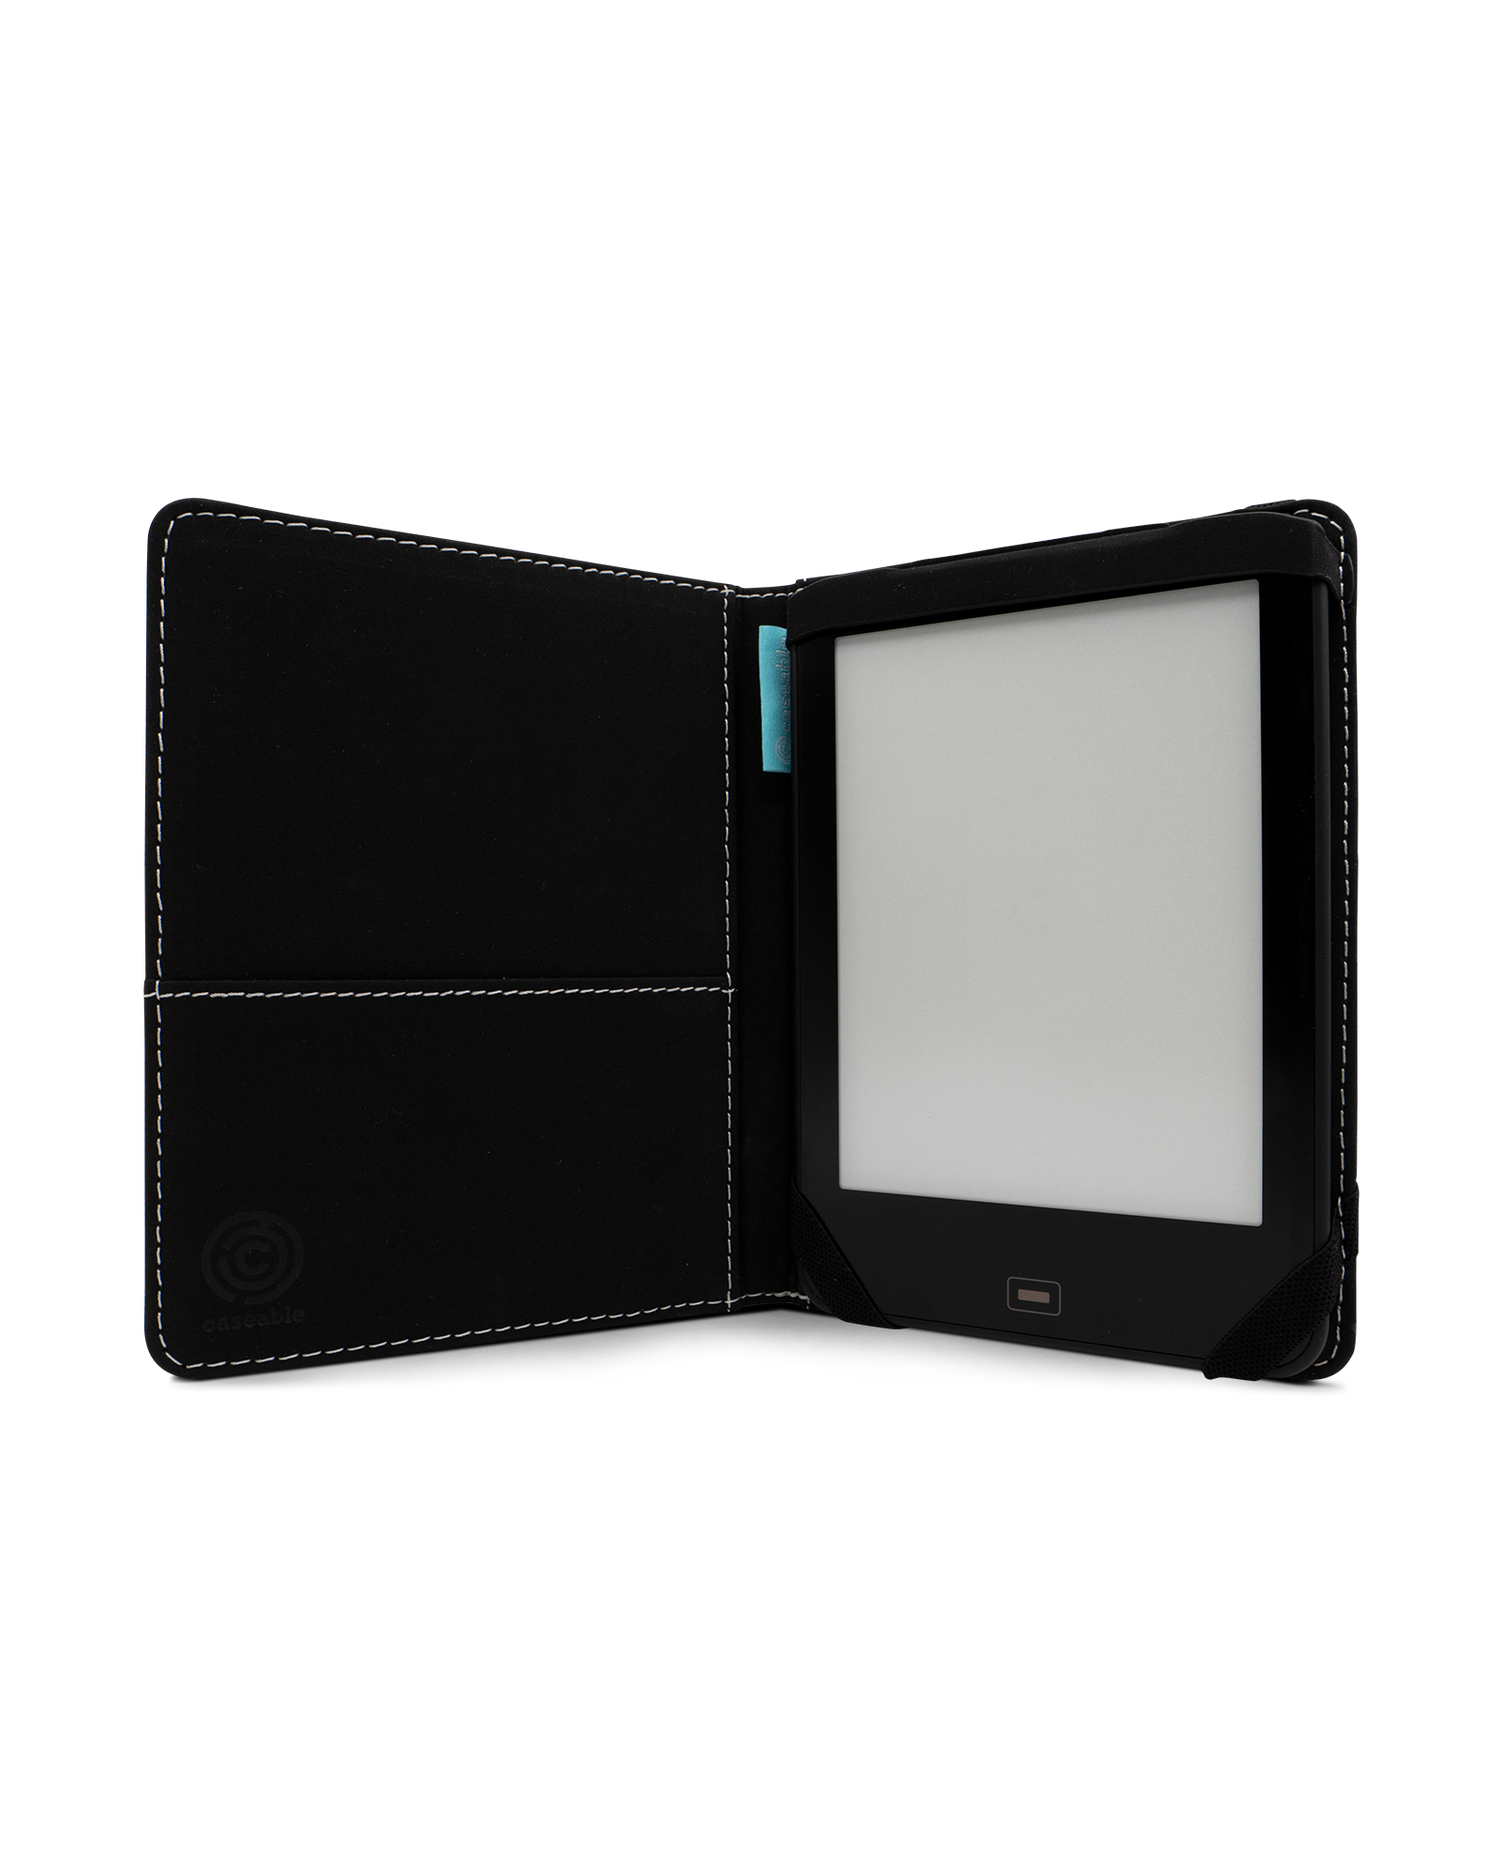 Bamboo Pattern eReader Case for tolino vision 1 to 4 HD: Opened interior view